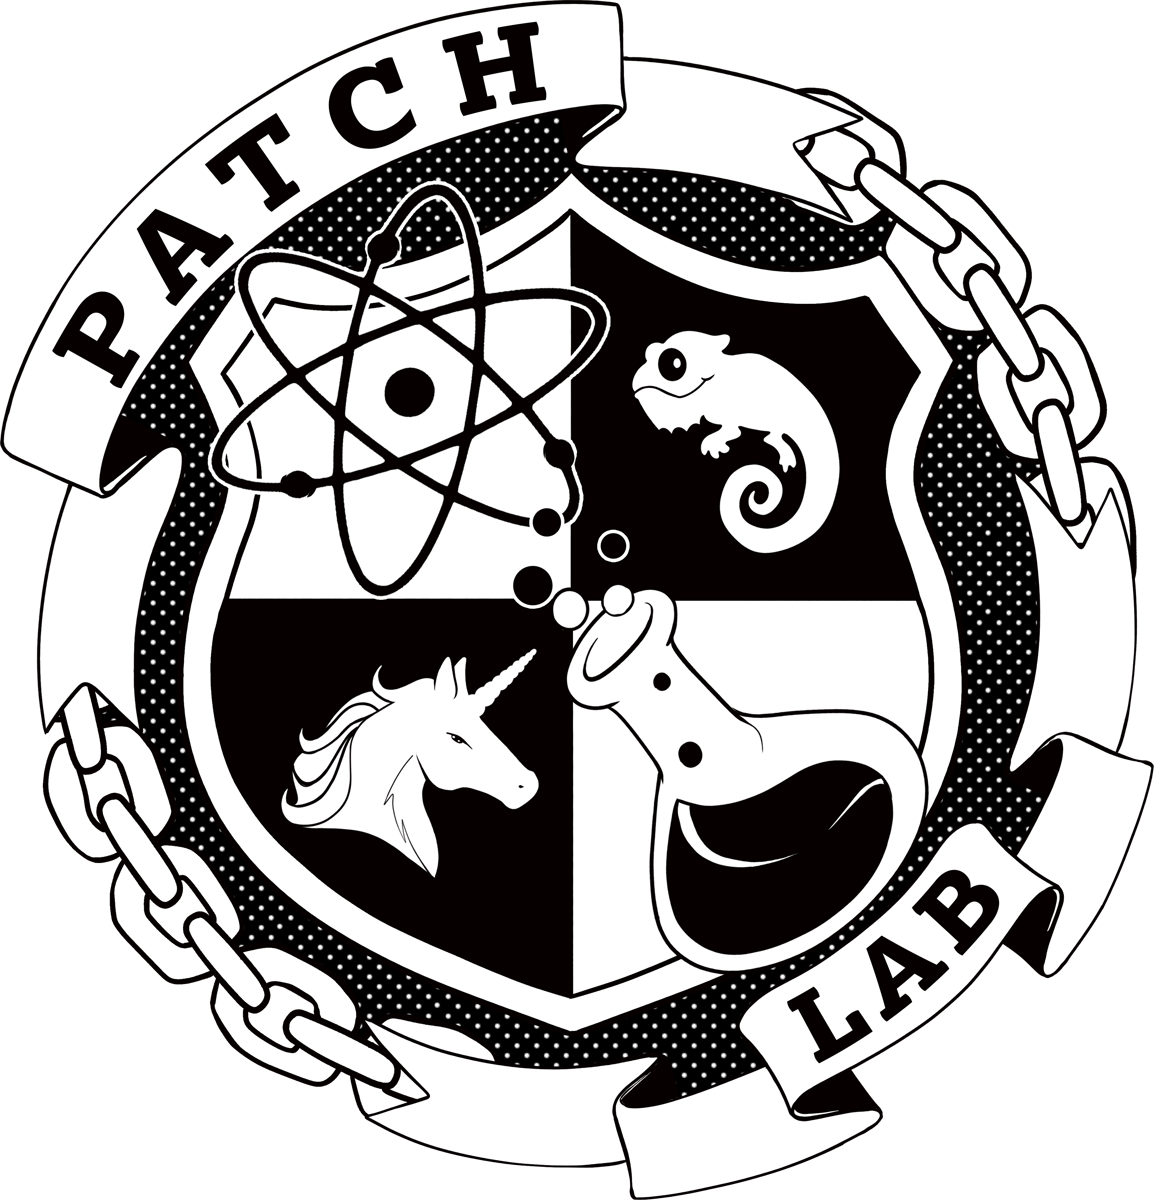 Patchlab